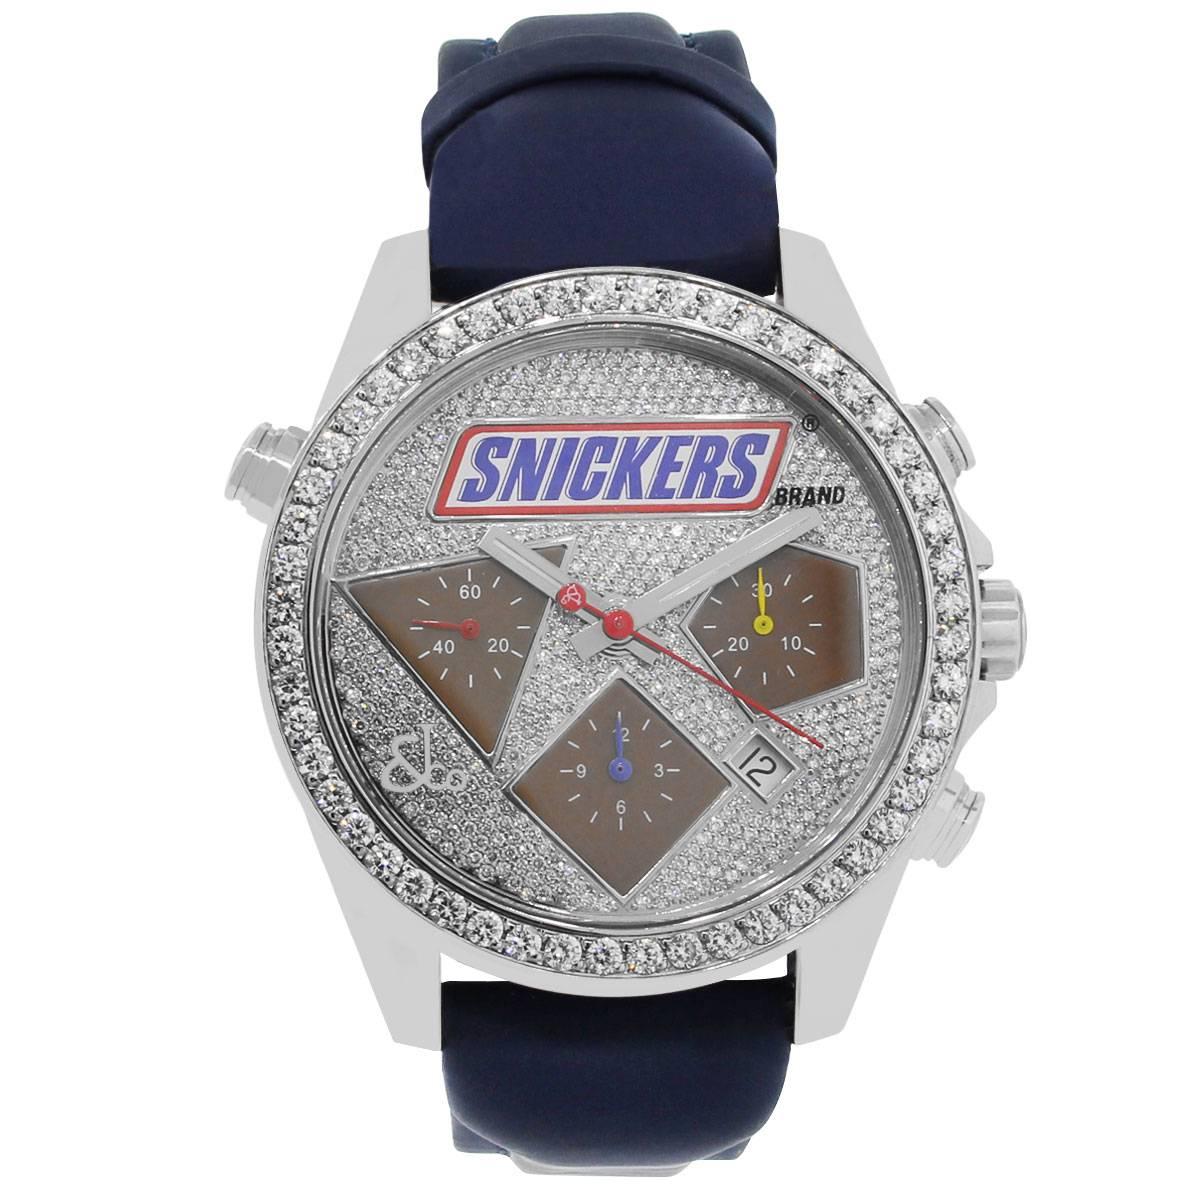 Brand: Jacob & Co.
MPN: 0468 Number 0644
Case Material: Stainless Steel
Case Diameter: 44mm
Crystal: Scratch resistant sapphire crystal
Bezel: Fixed diamond bezel
Dial: Diamond dial with snickers logo located at 12 o’ clock. Chronograph dial with